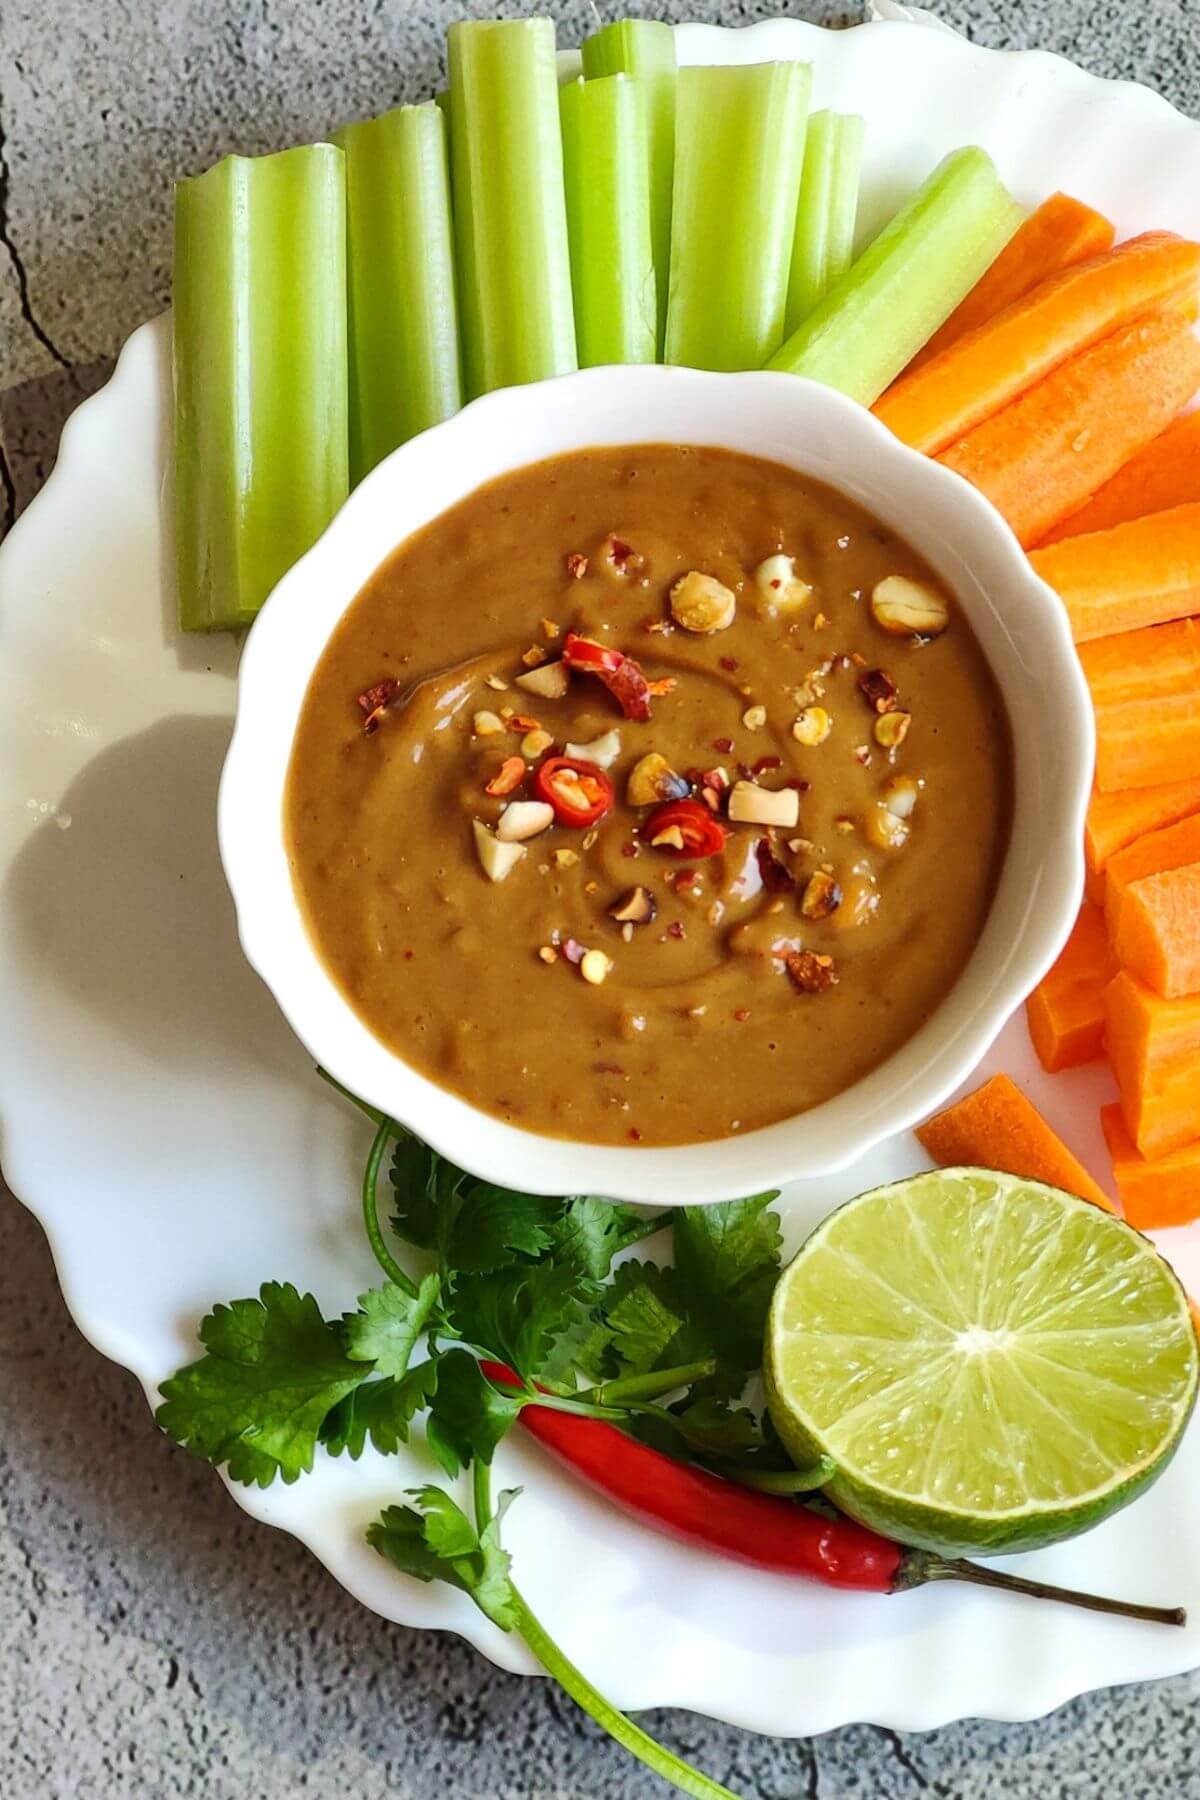 Thai peanut sauce served with vegetable sticks, lime slice, chili pepper, and cilantro